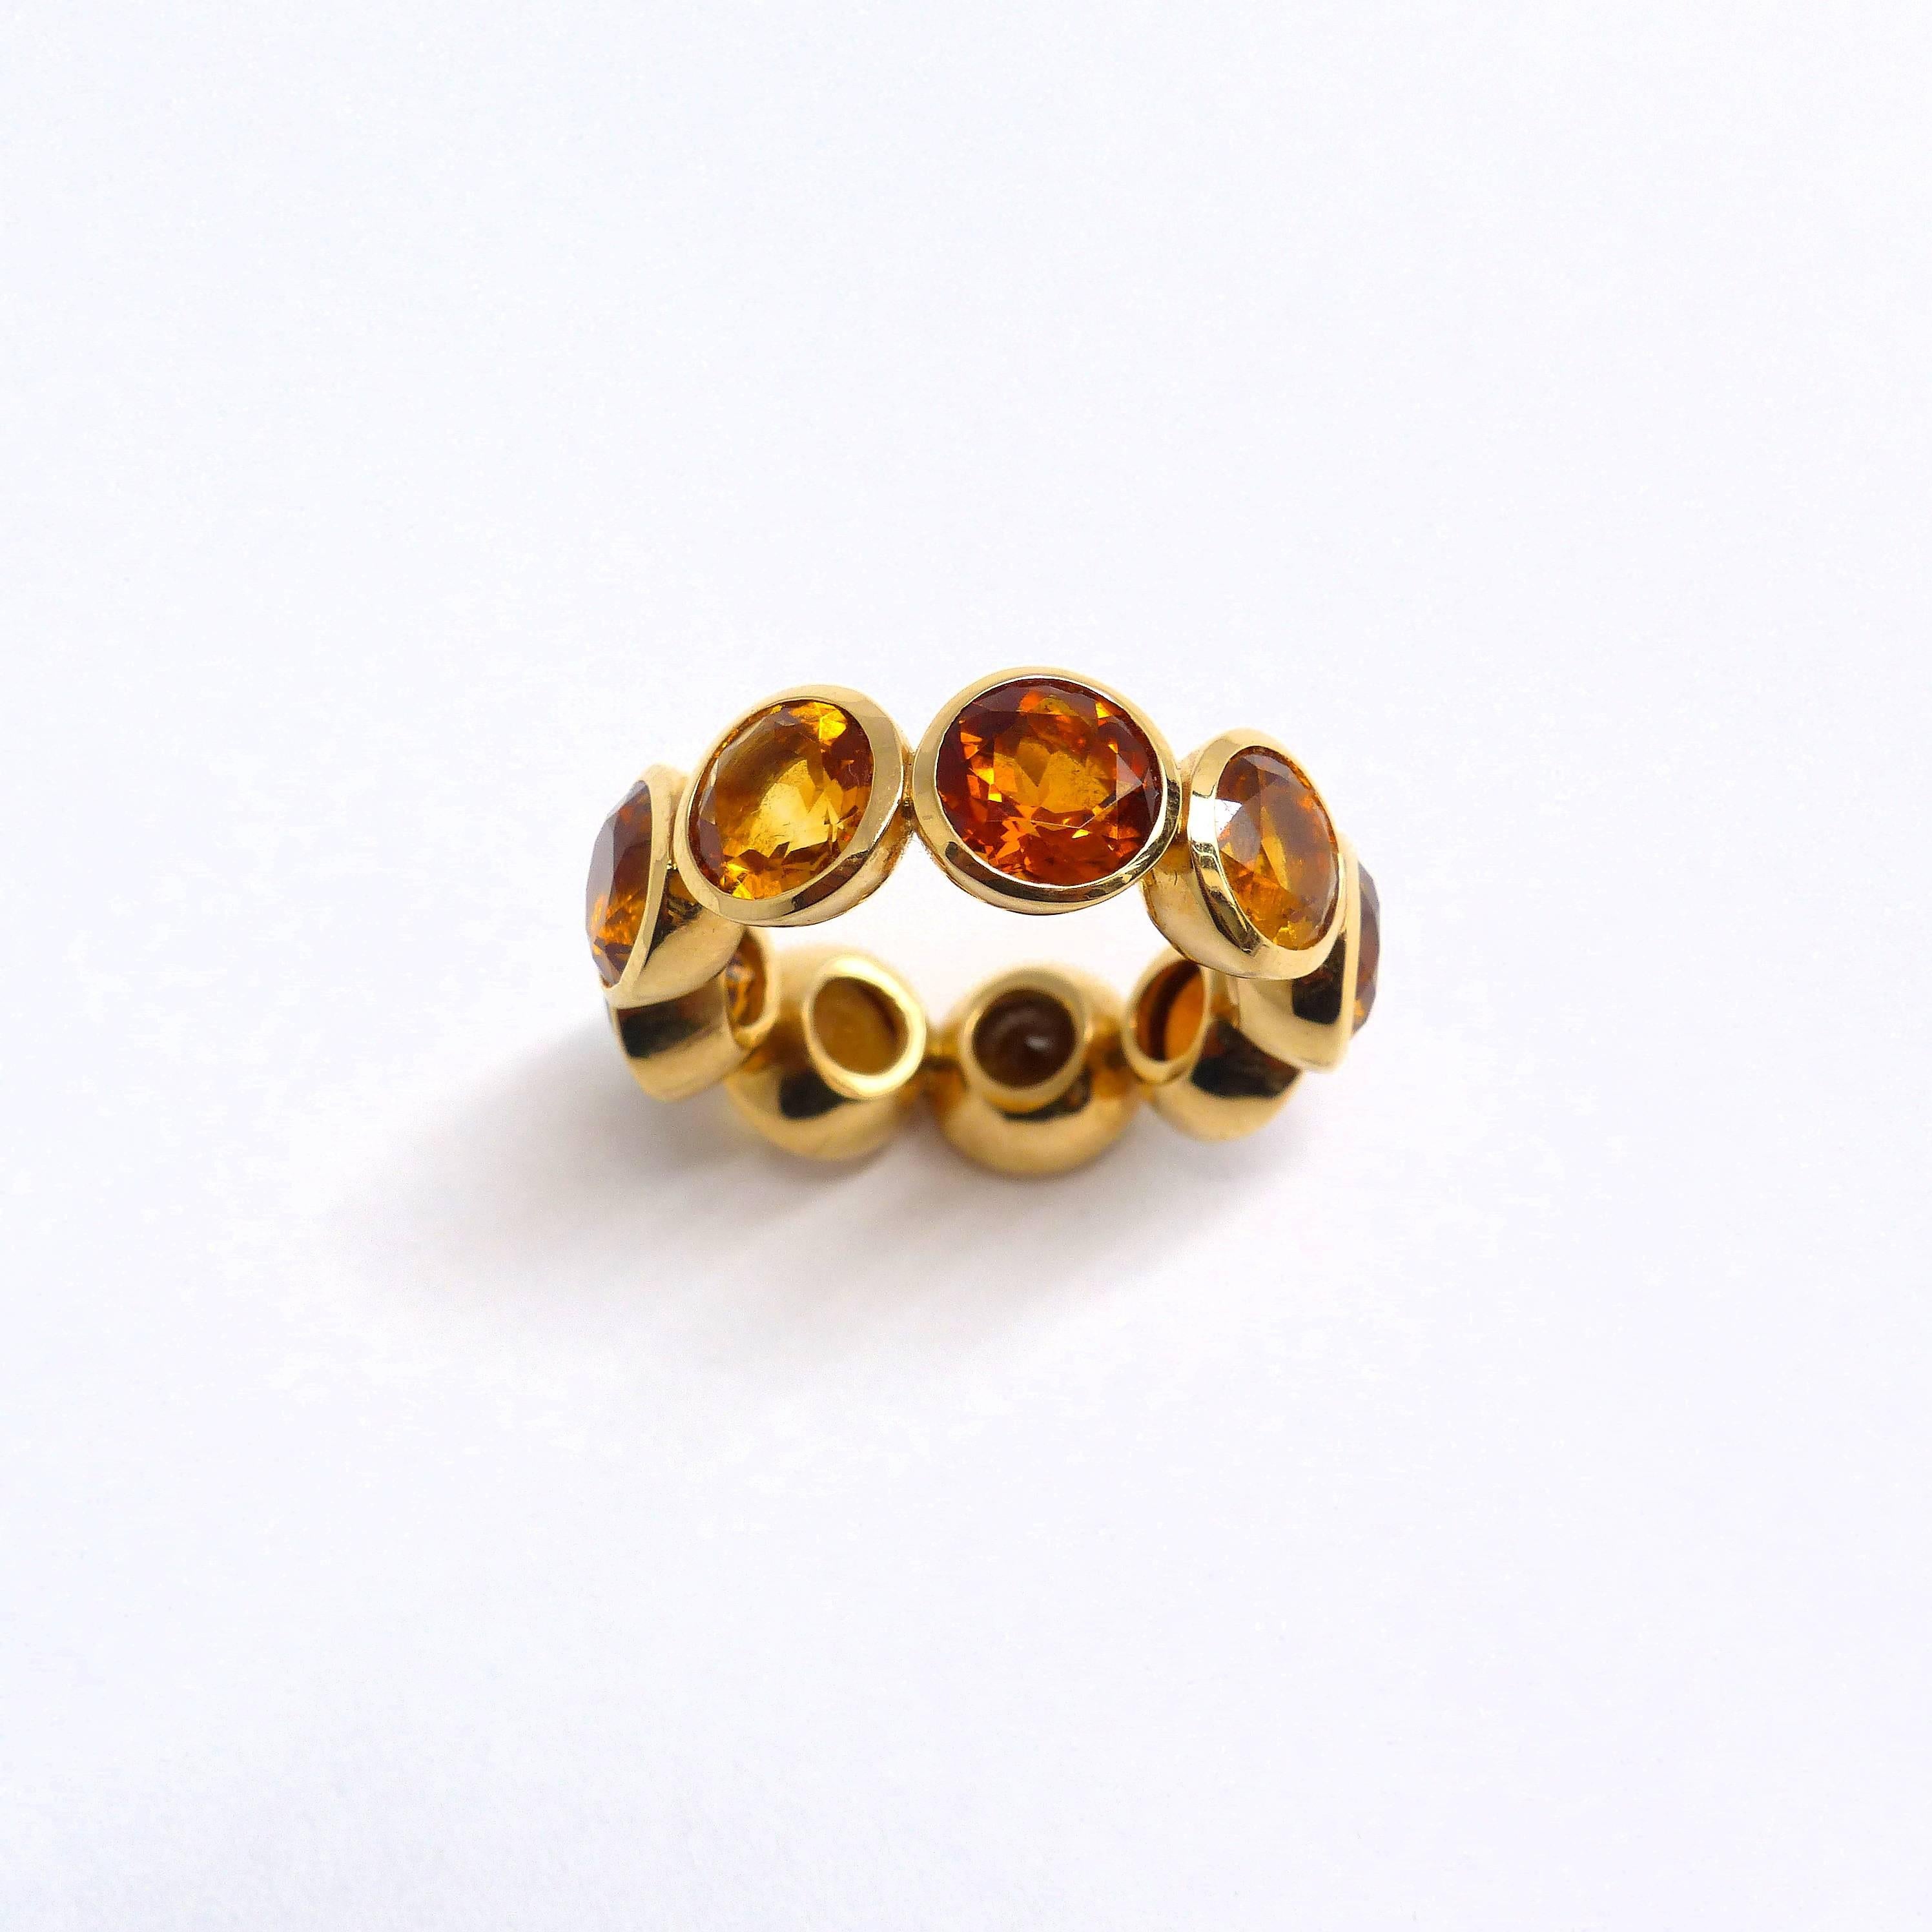 18k rose gold (11.03g) ring is set with 10x fine Citrines (facetted, round, 7mm, 9.54cts). 

Ringsize: 7 1/4 (56)

2 separate extentions in 18k rose gold (11.76g) can be added for an extra cost of € 1.512,-.